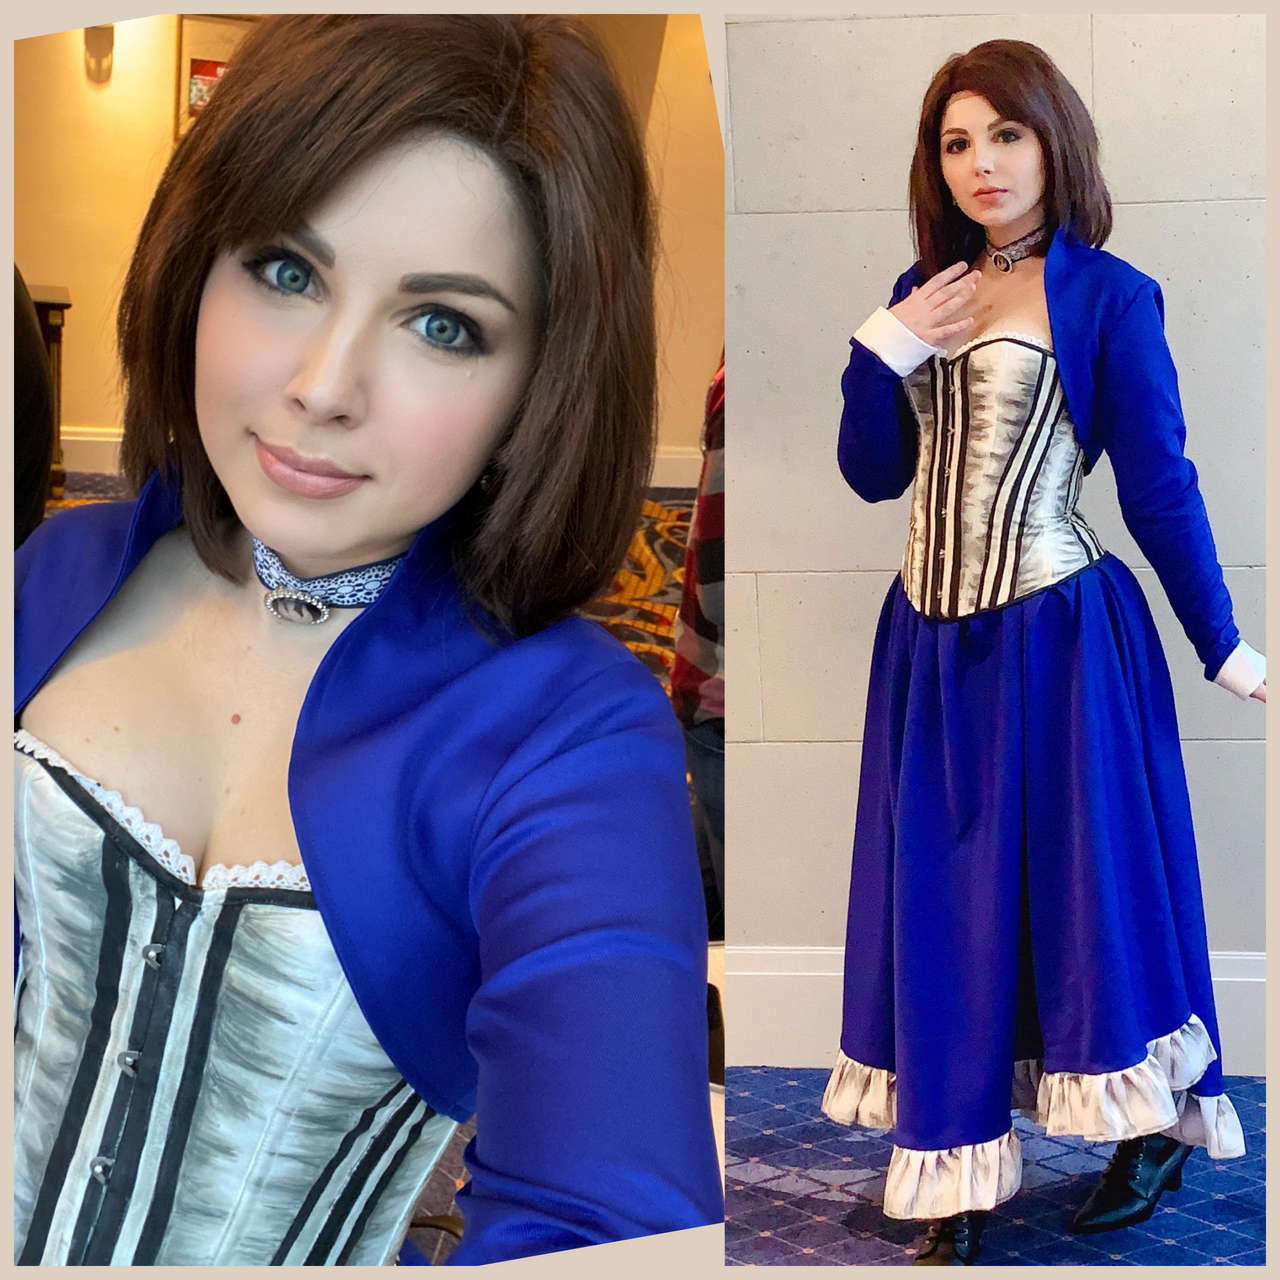 Self Sarah Fong Elizabeth Comstock Cosplay Magfest 202